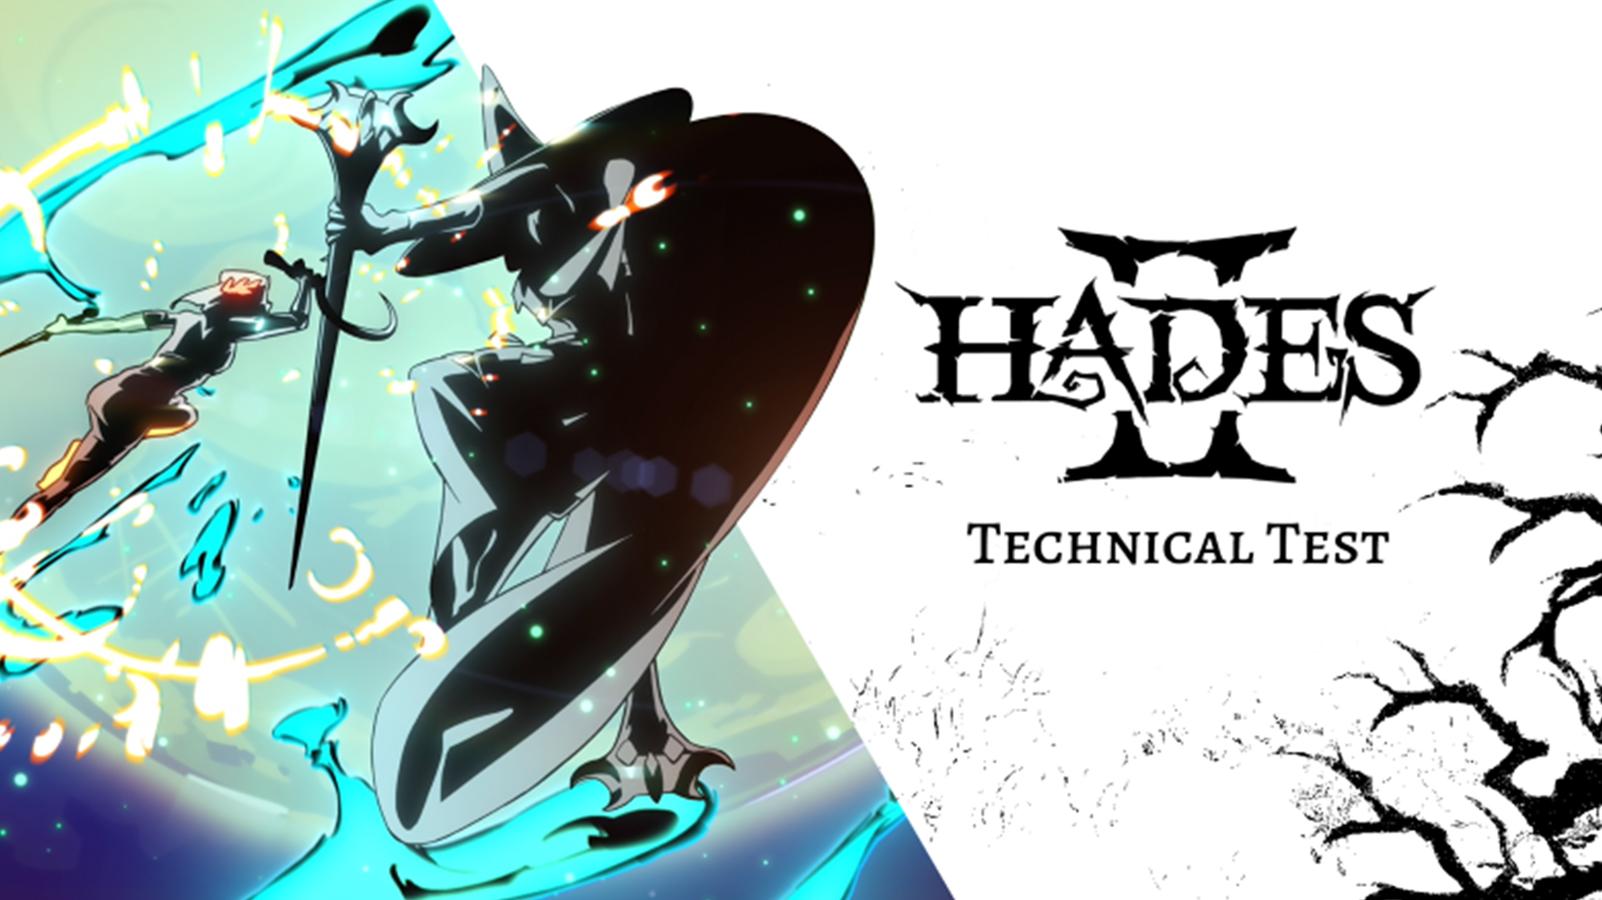 Hades 2 Technical Test cover art